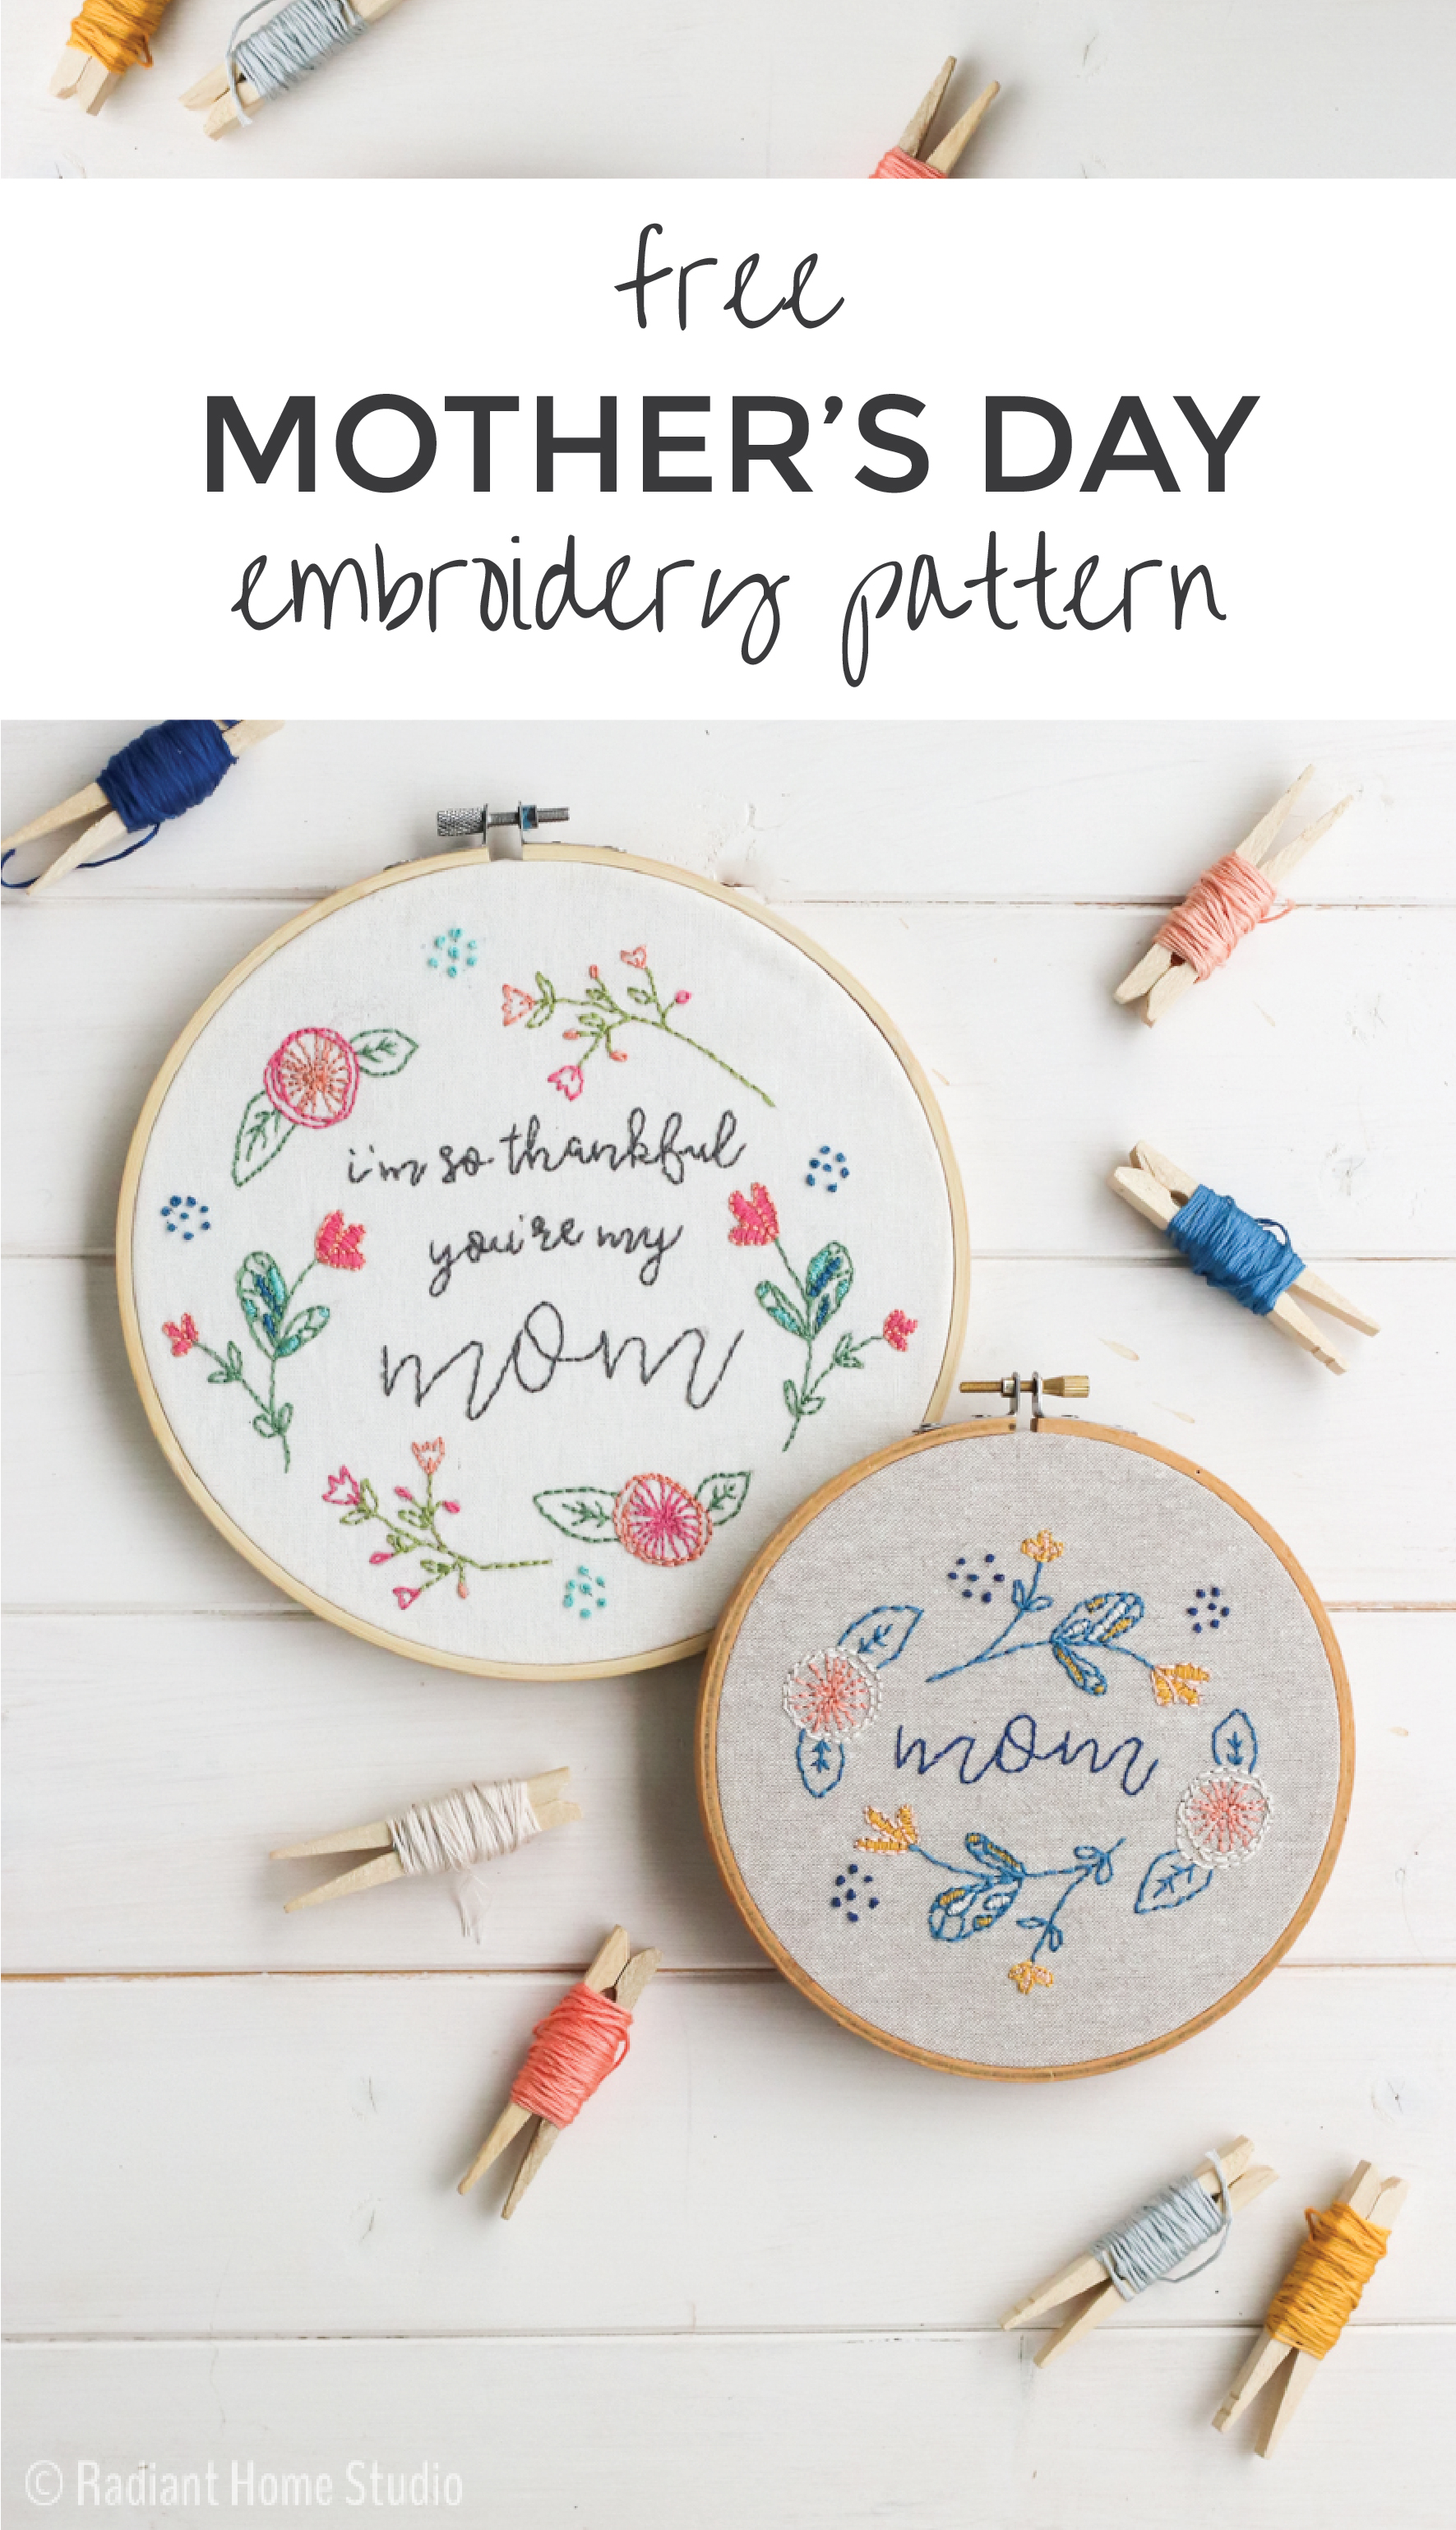 Free Embroidery Patterns Free Mothers Day Embroidery Pattern Radiant Home Studio